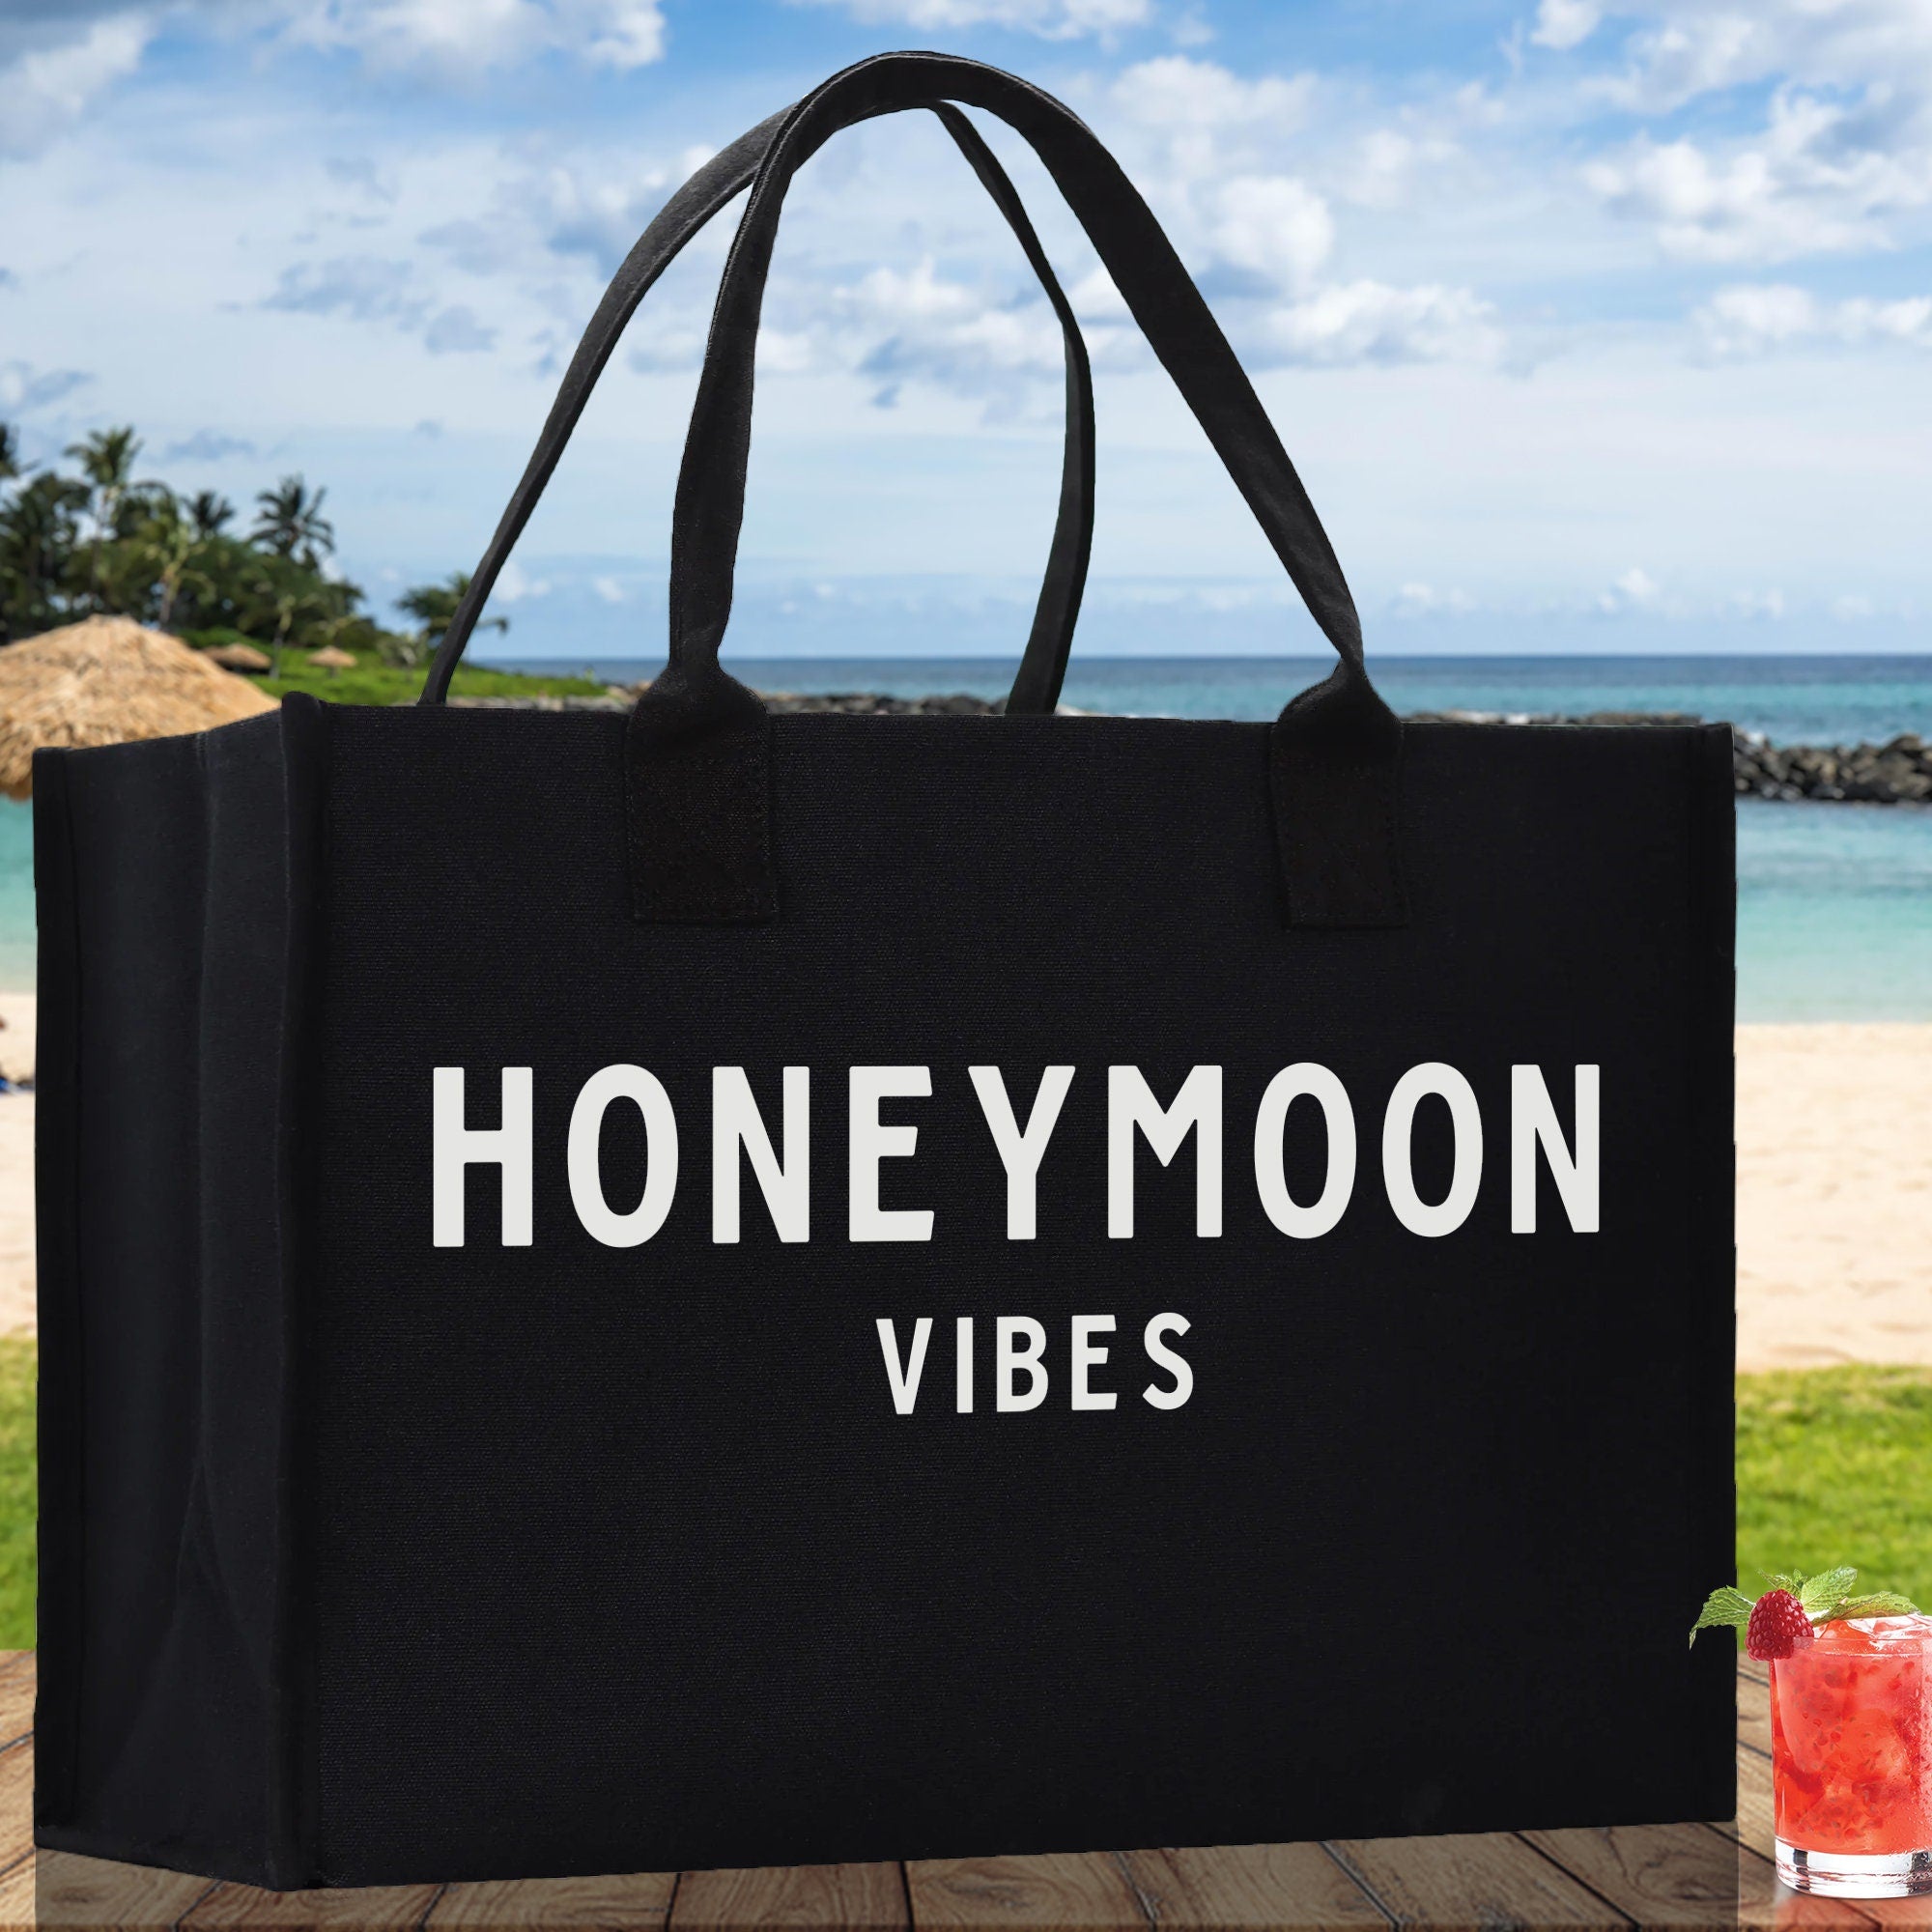 Honeymoon Vibes Cotton Canvas Chic Beach Tote Bag Multipurpose Tote Weekender Tote Gift for Her Outdoor Tote Vacation Tote Large Beach Bag